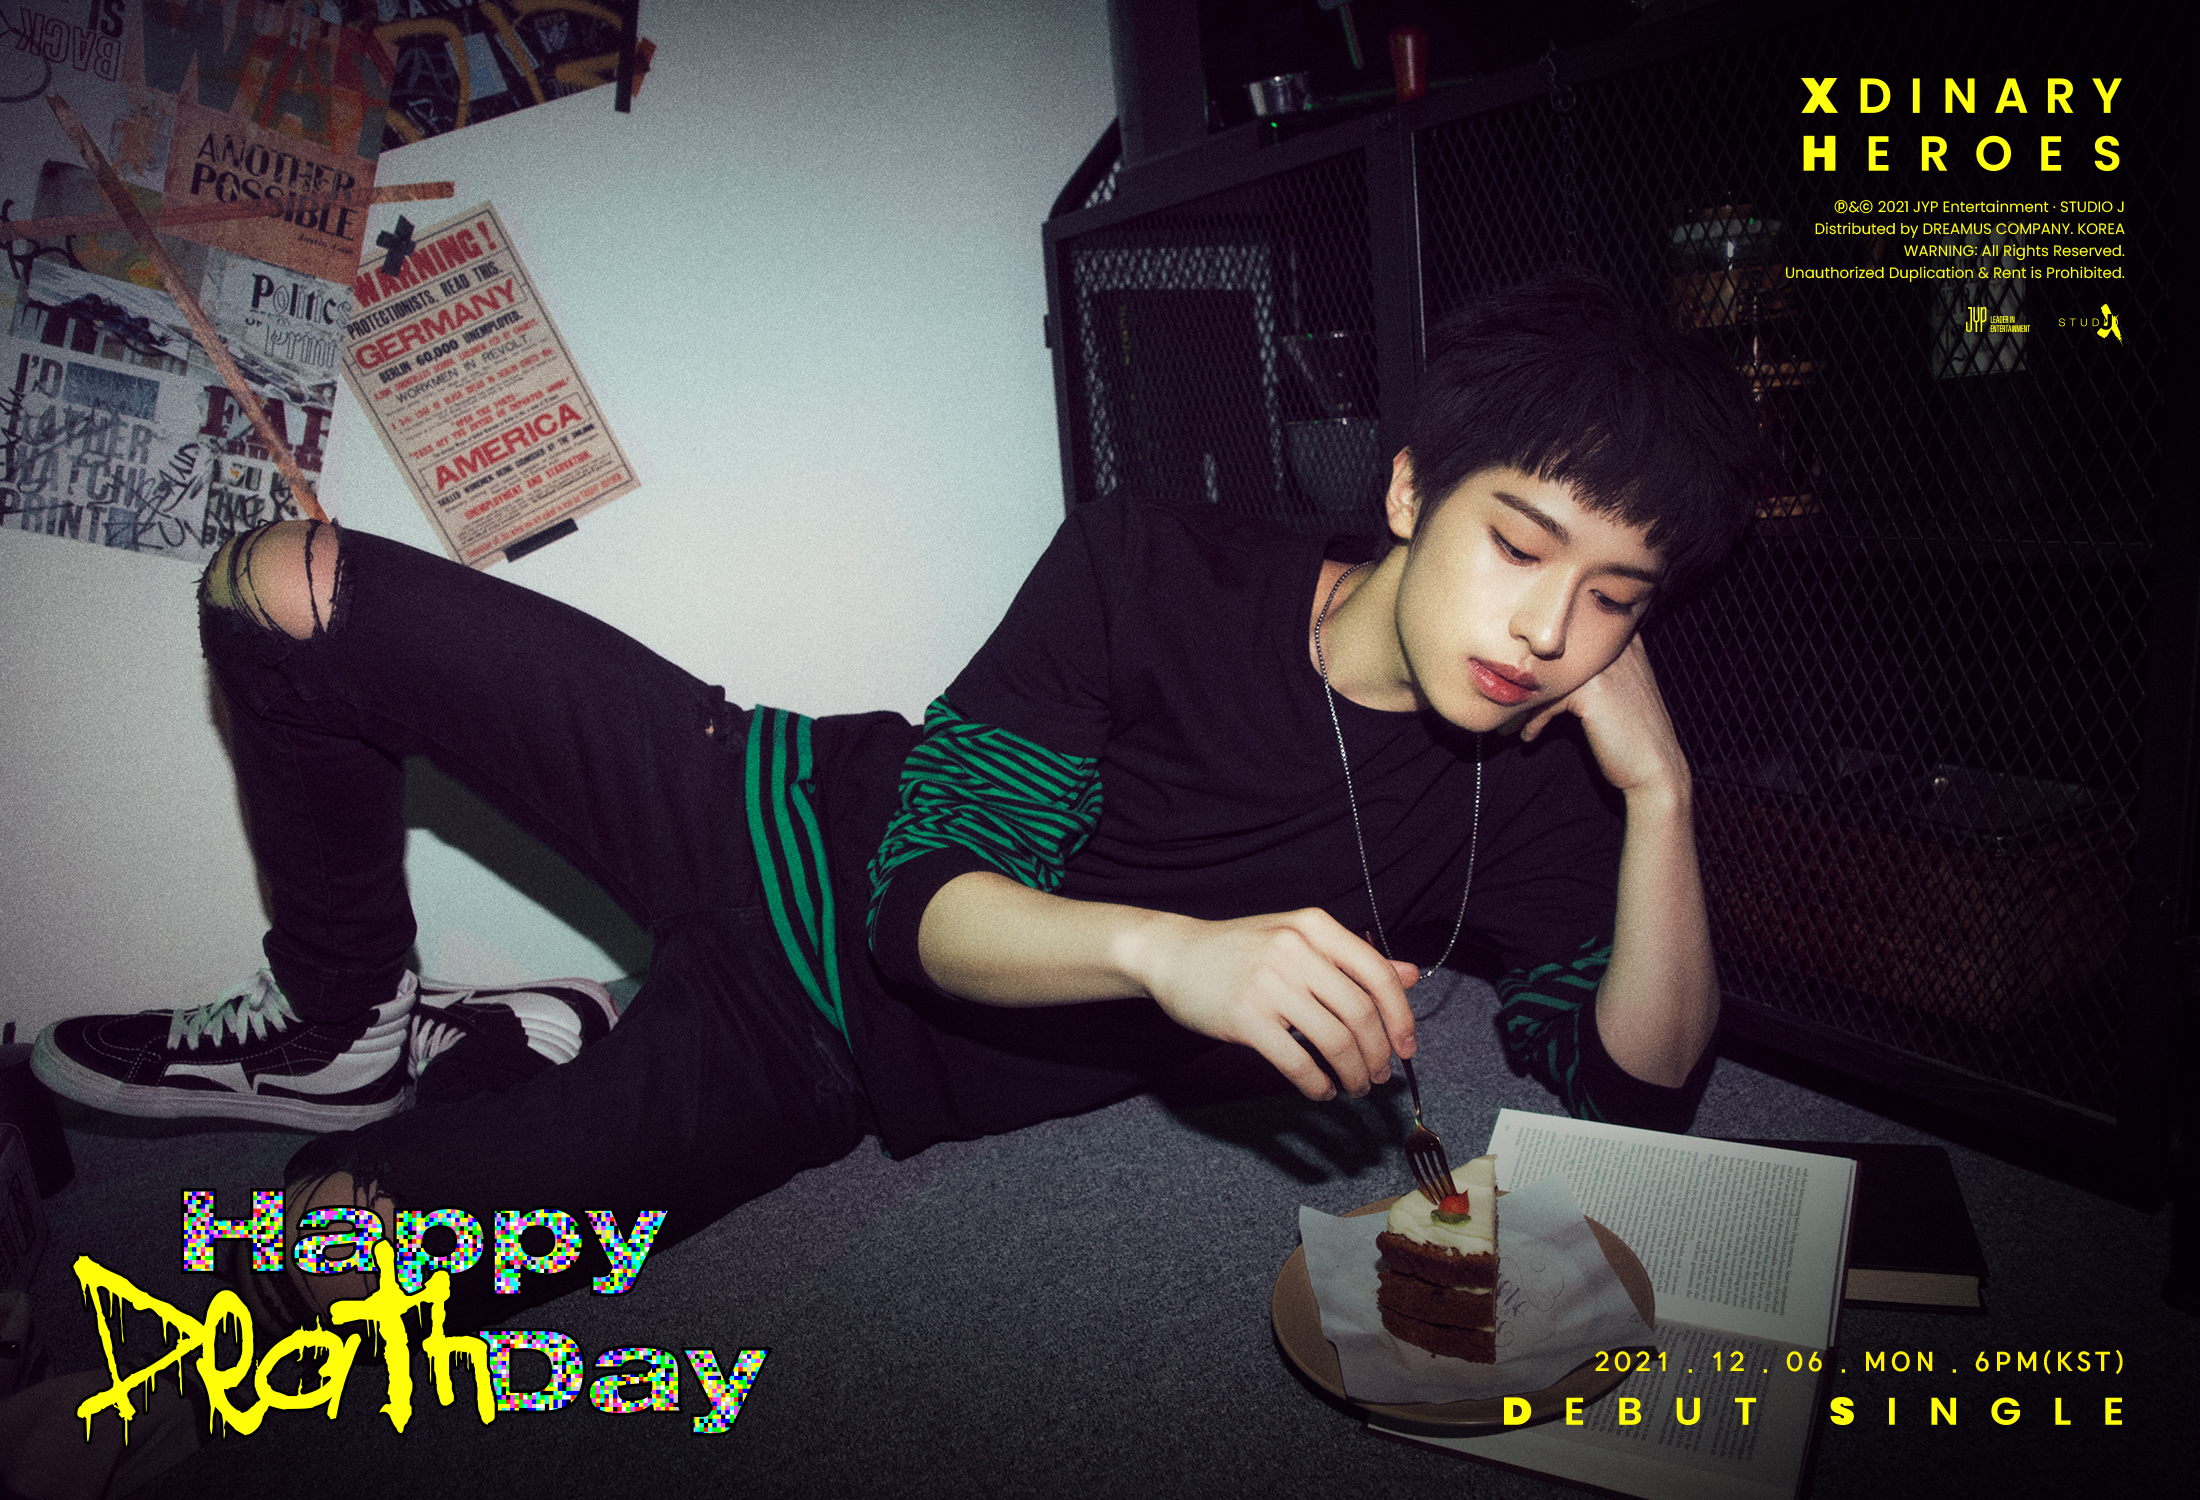 Xdinary Heroes 'Happy Death Day' Concept Photo